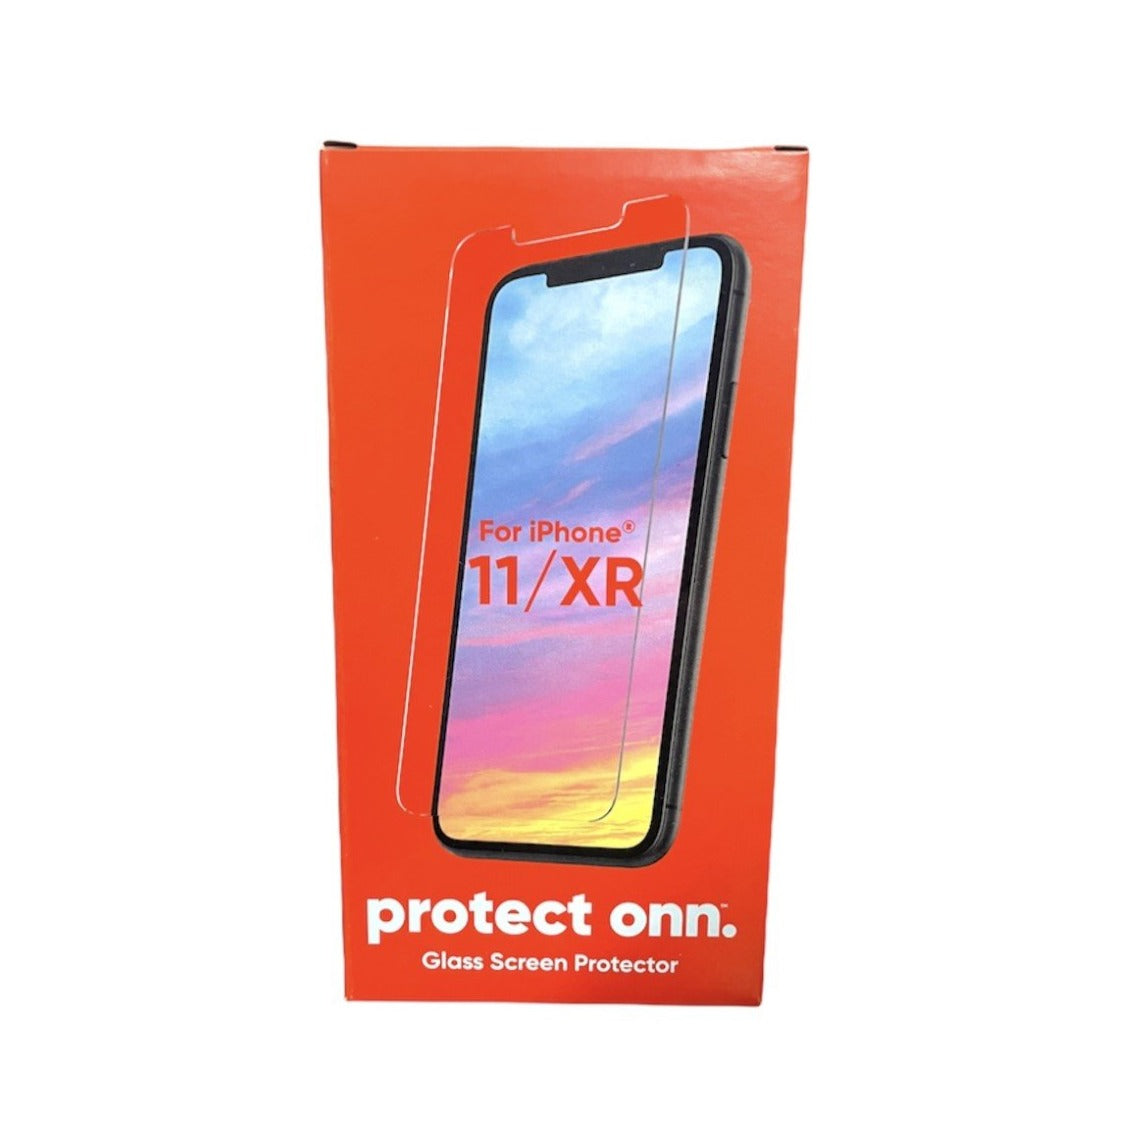 Onn Glass Screen Protector For iPhone 11, iPhone XR - Pack Of 10